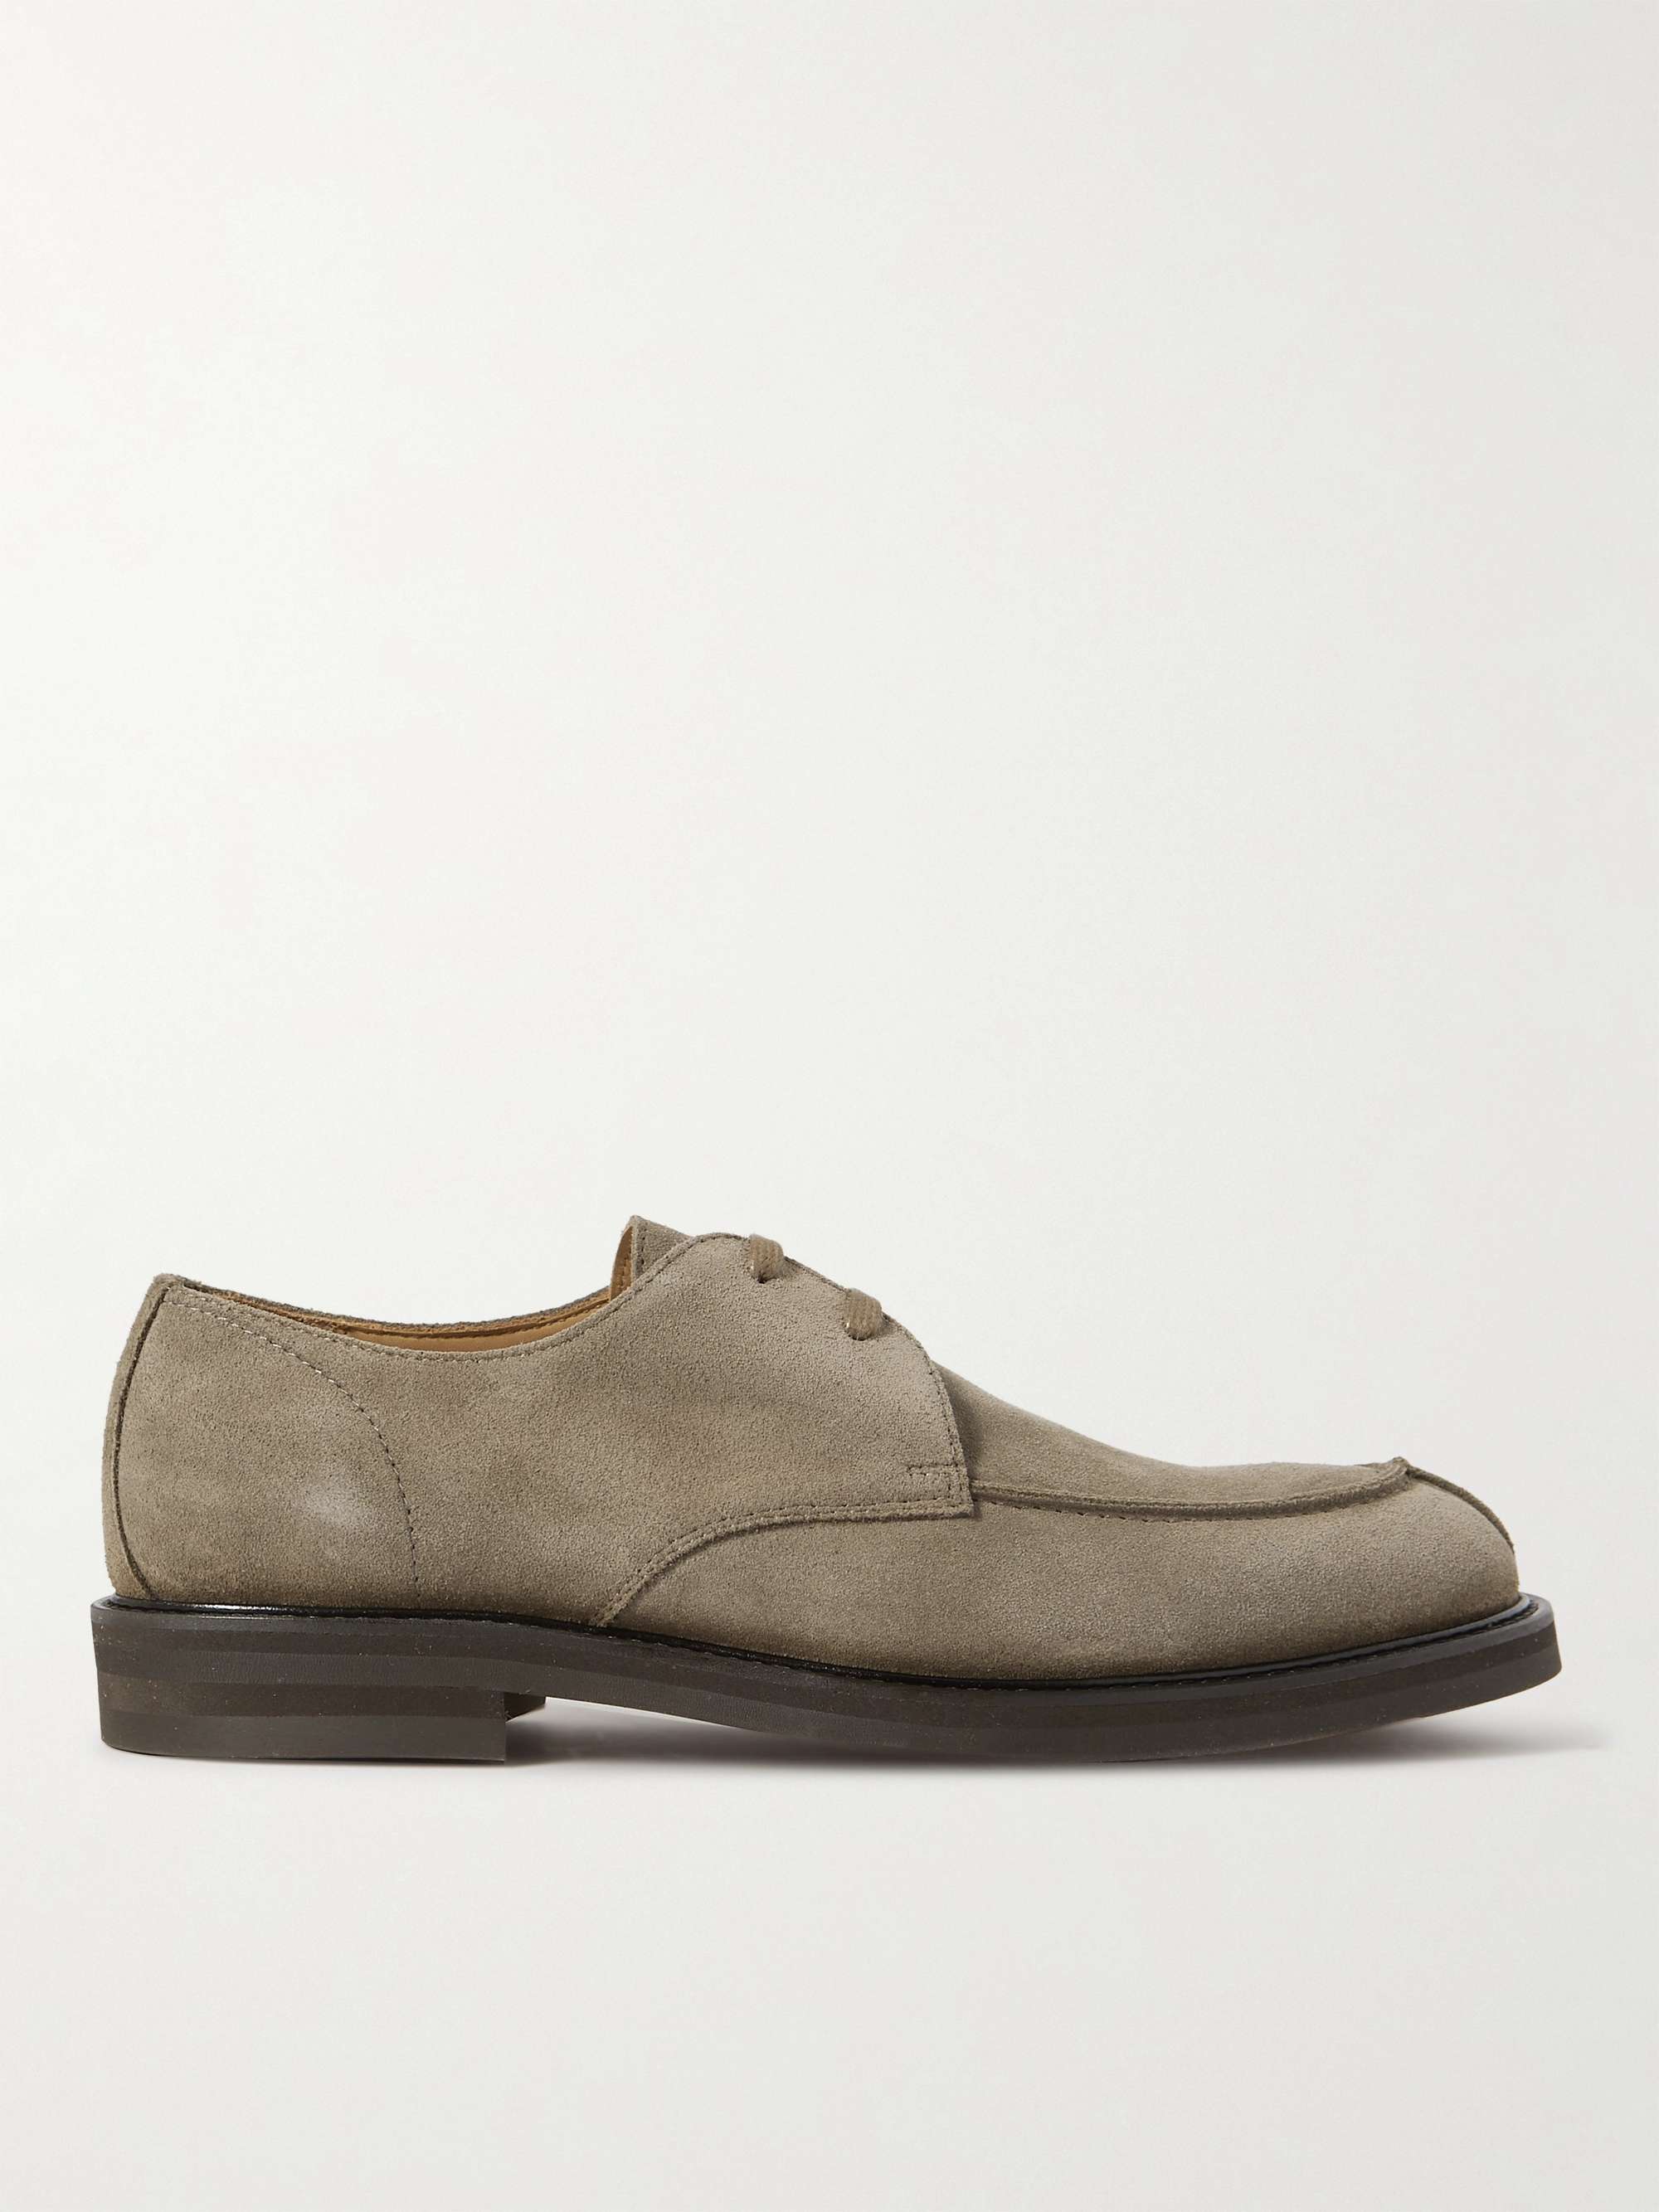 MR P. Andrew Split-Toe Regenerated Suede by evolo® Derby Shoes | MR PORTER